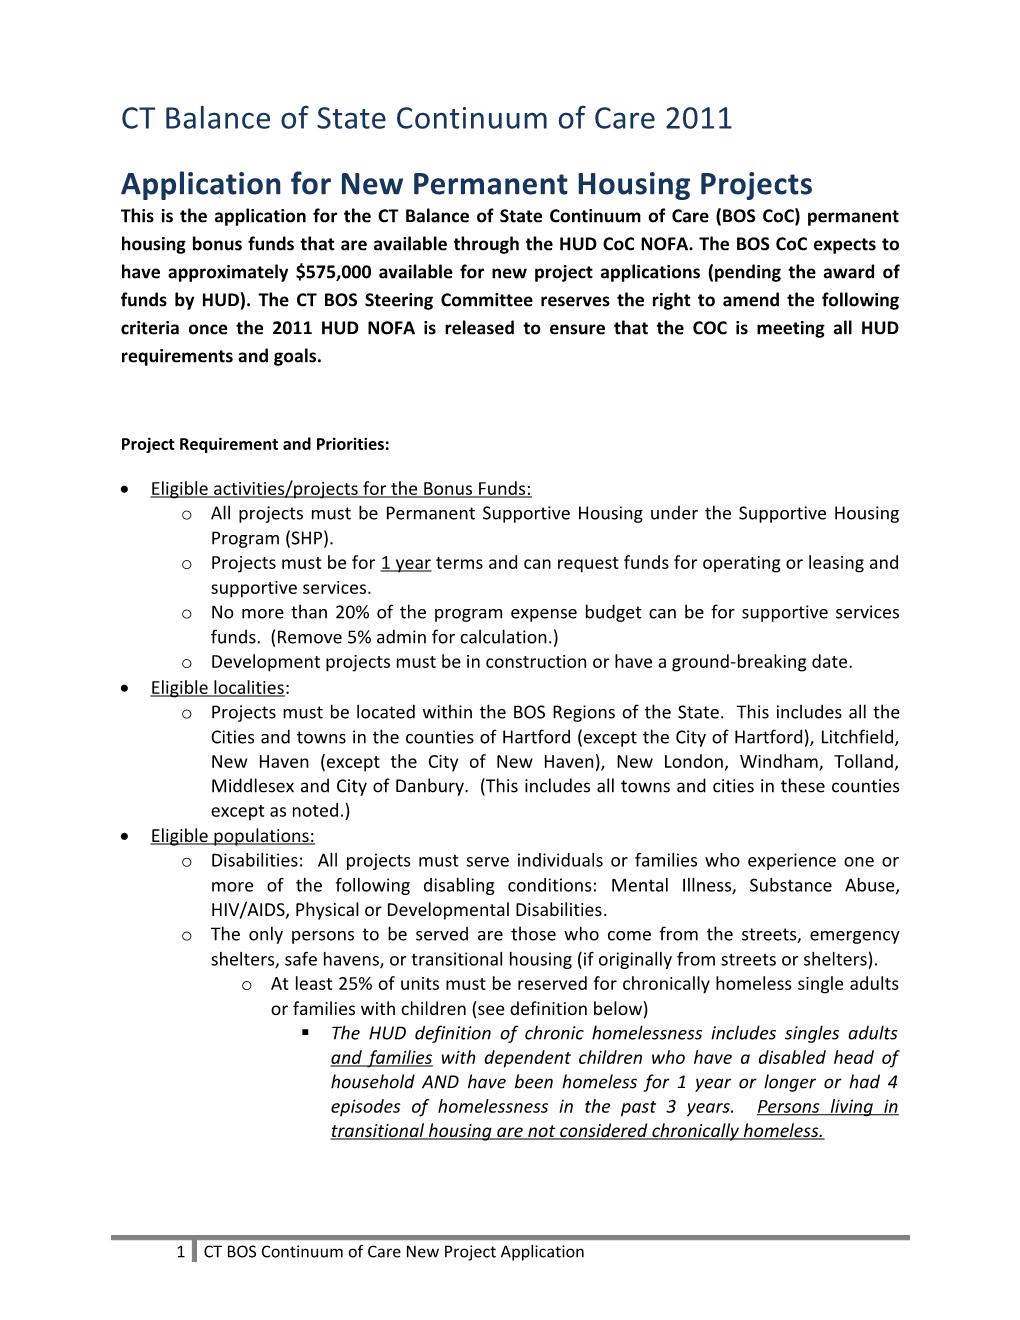 Application for New Permanent Housing Projects